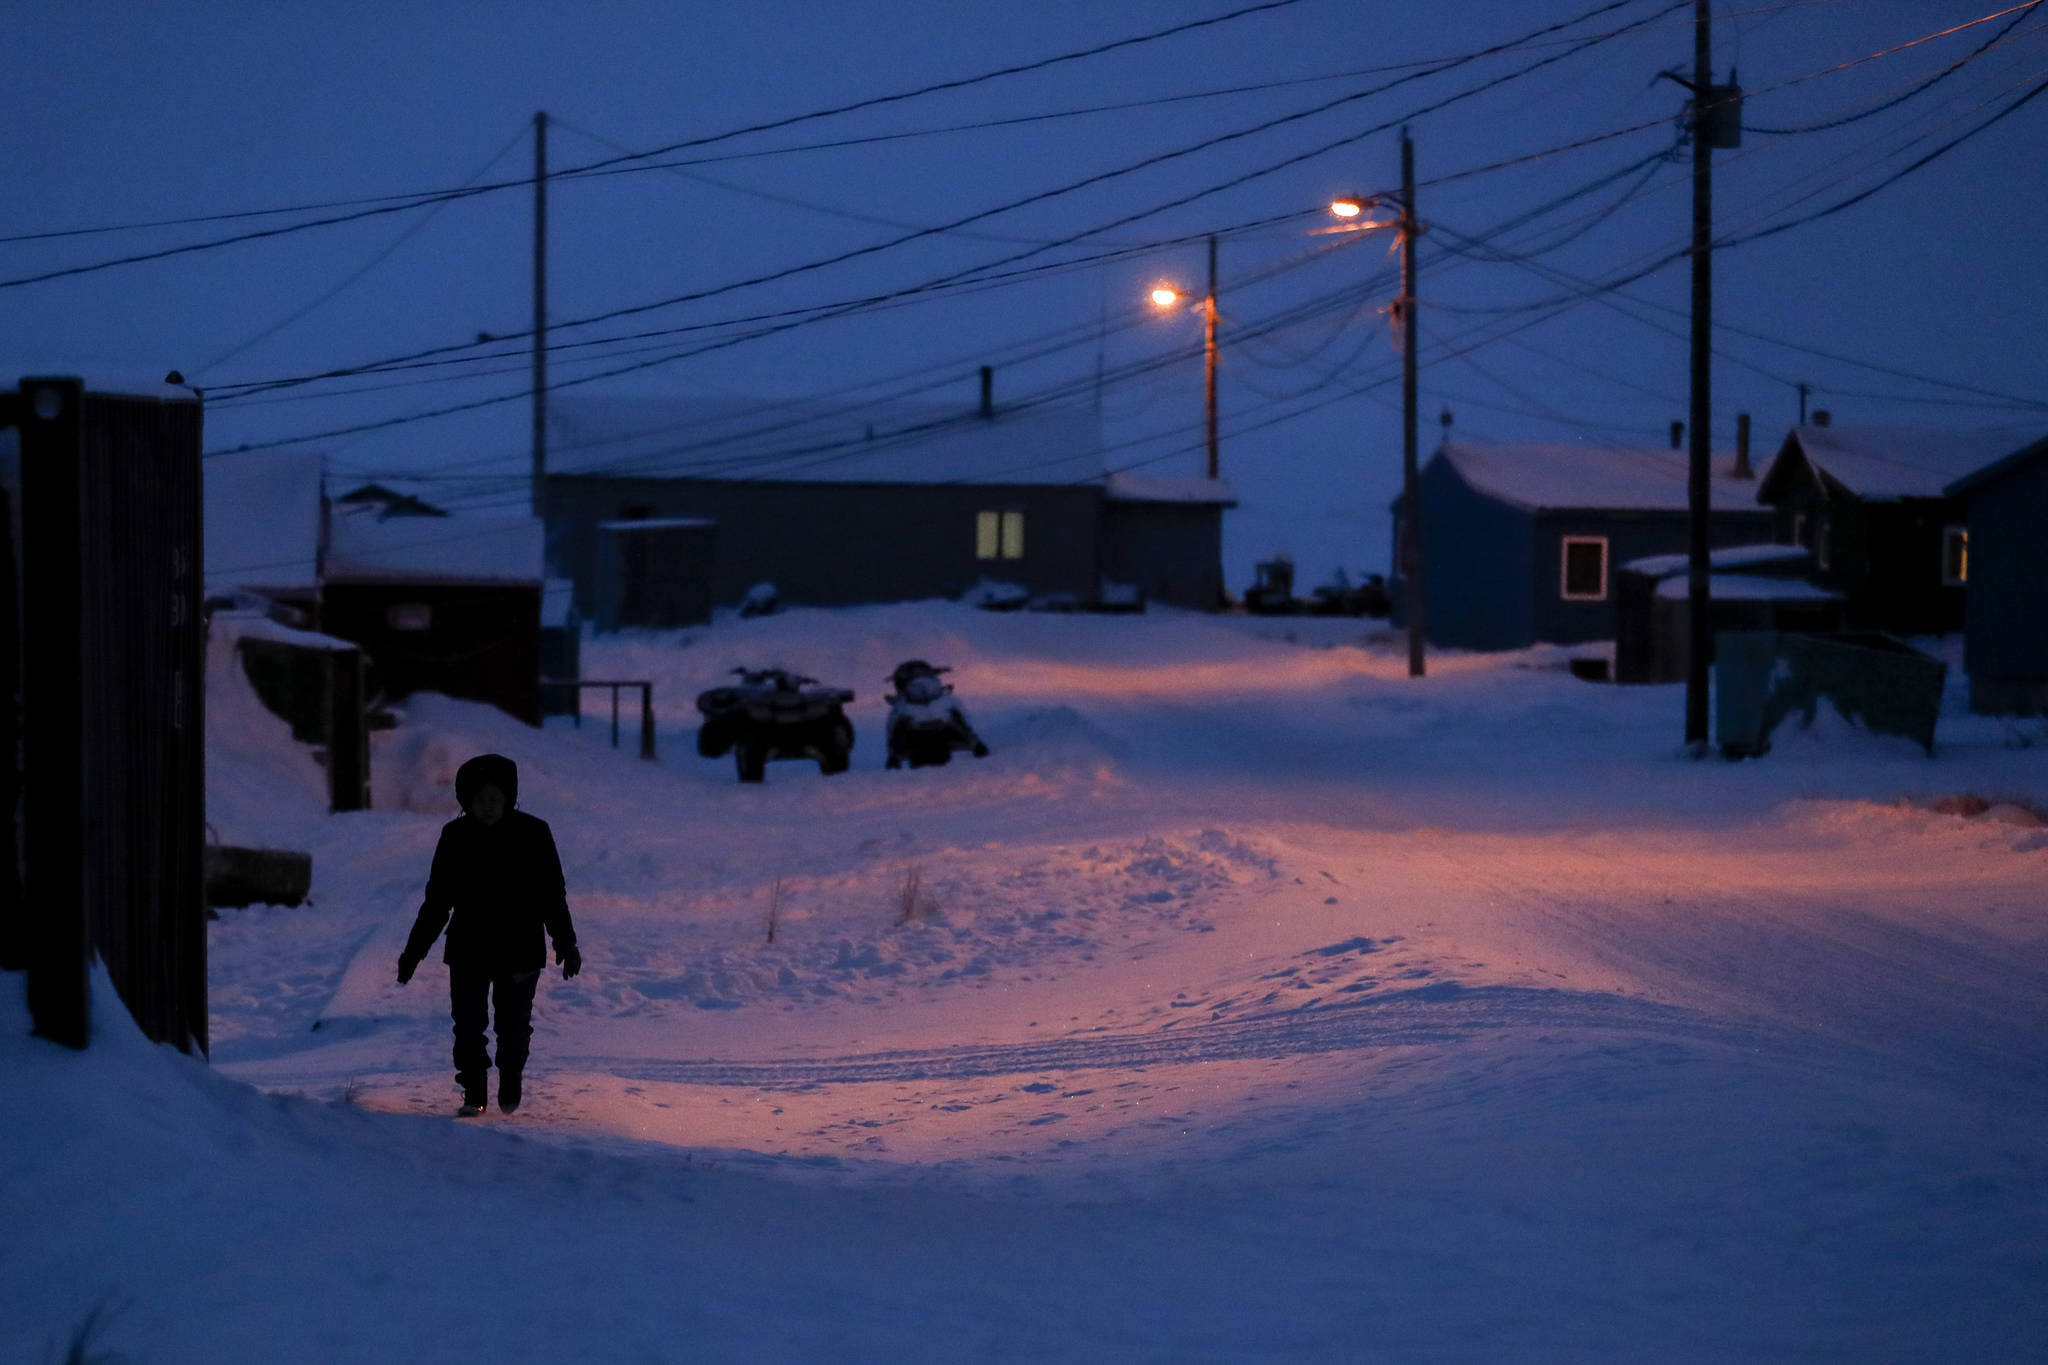 AP Photo | Gregory Bull, File                                 A woman walks before dawn in Toksook Bay, Alaska, a mostly Yup’ik village on the edge of the Bering Sea. A judge has ruled in favor of tribal nations in their bid to keep Alaska Native corporations from getting a share of $8 billion in coronavirus relief funding — at least for now. In a decision issued late Monday, April 27, U.S. District Judge Amit Mehta in Washington, D.C., said the U.S. Treasury Department could begin disbursing funding to 574 federally recognized tribes to respond to the coronavirus but not to the corporations.